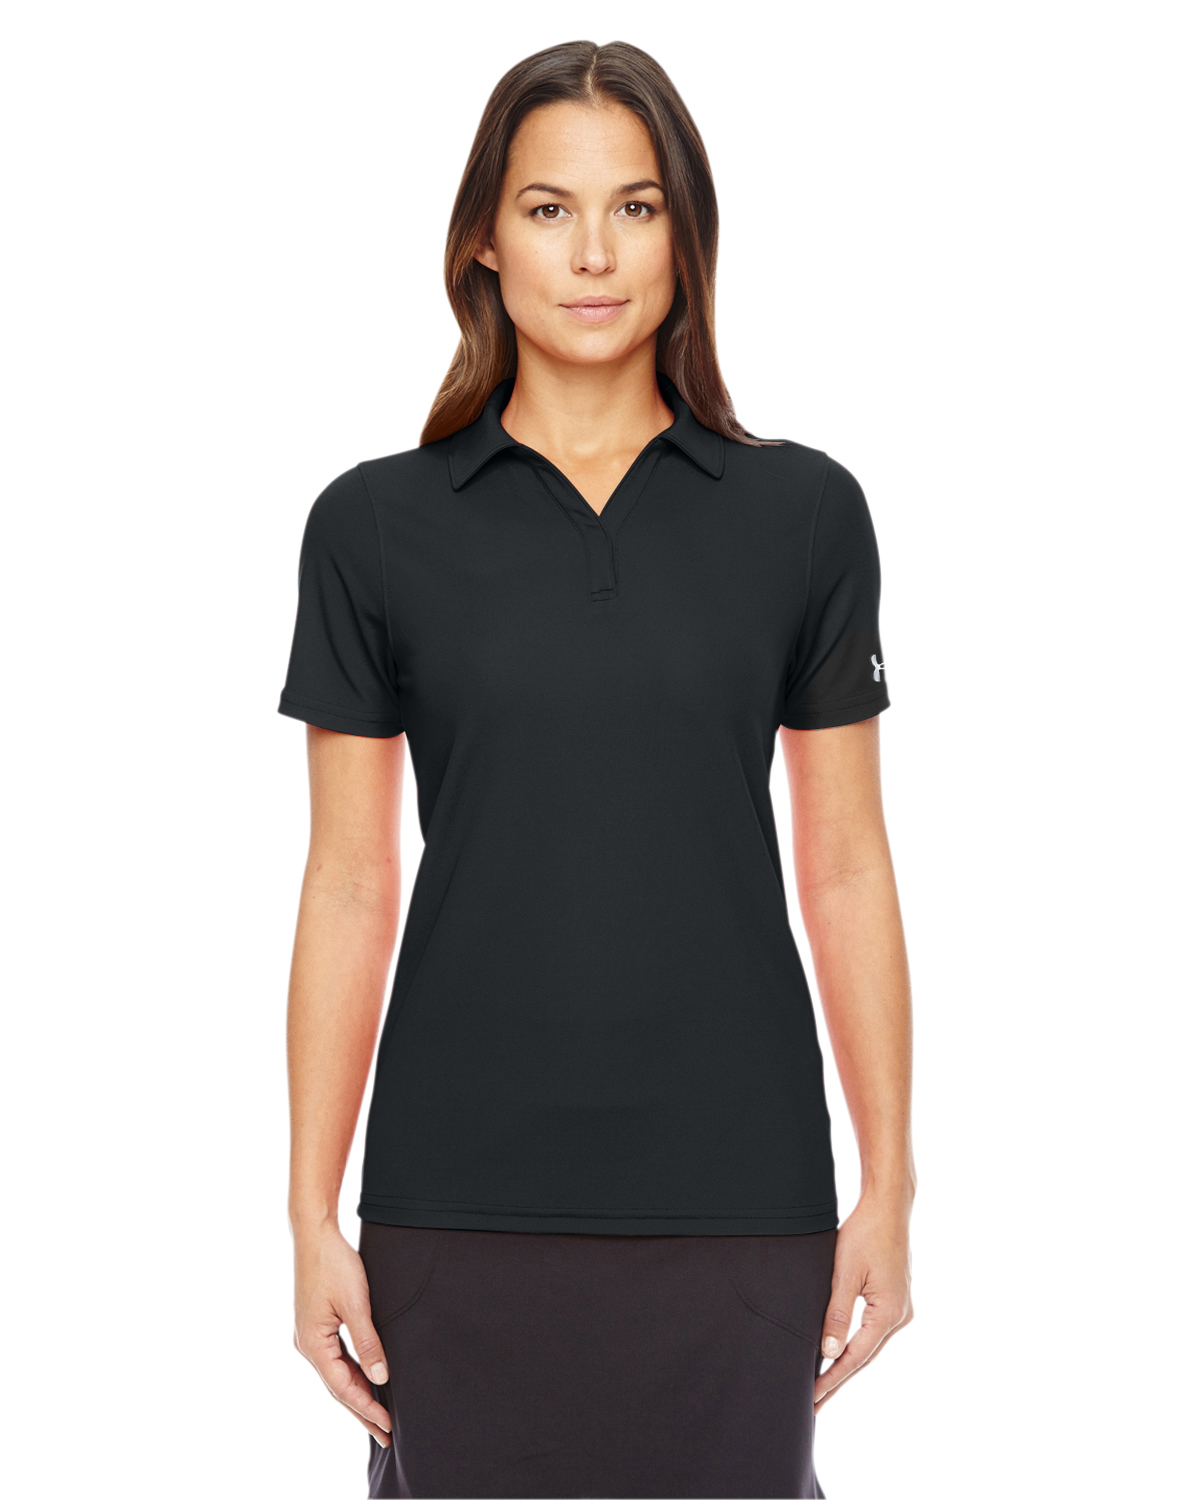 Under Armour 1261606- Ladies' Corp Performance Polo